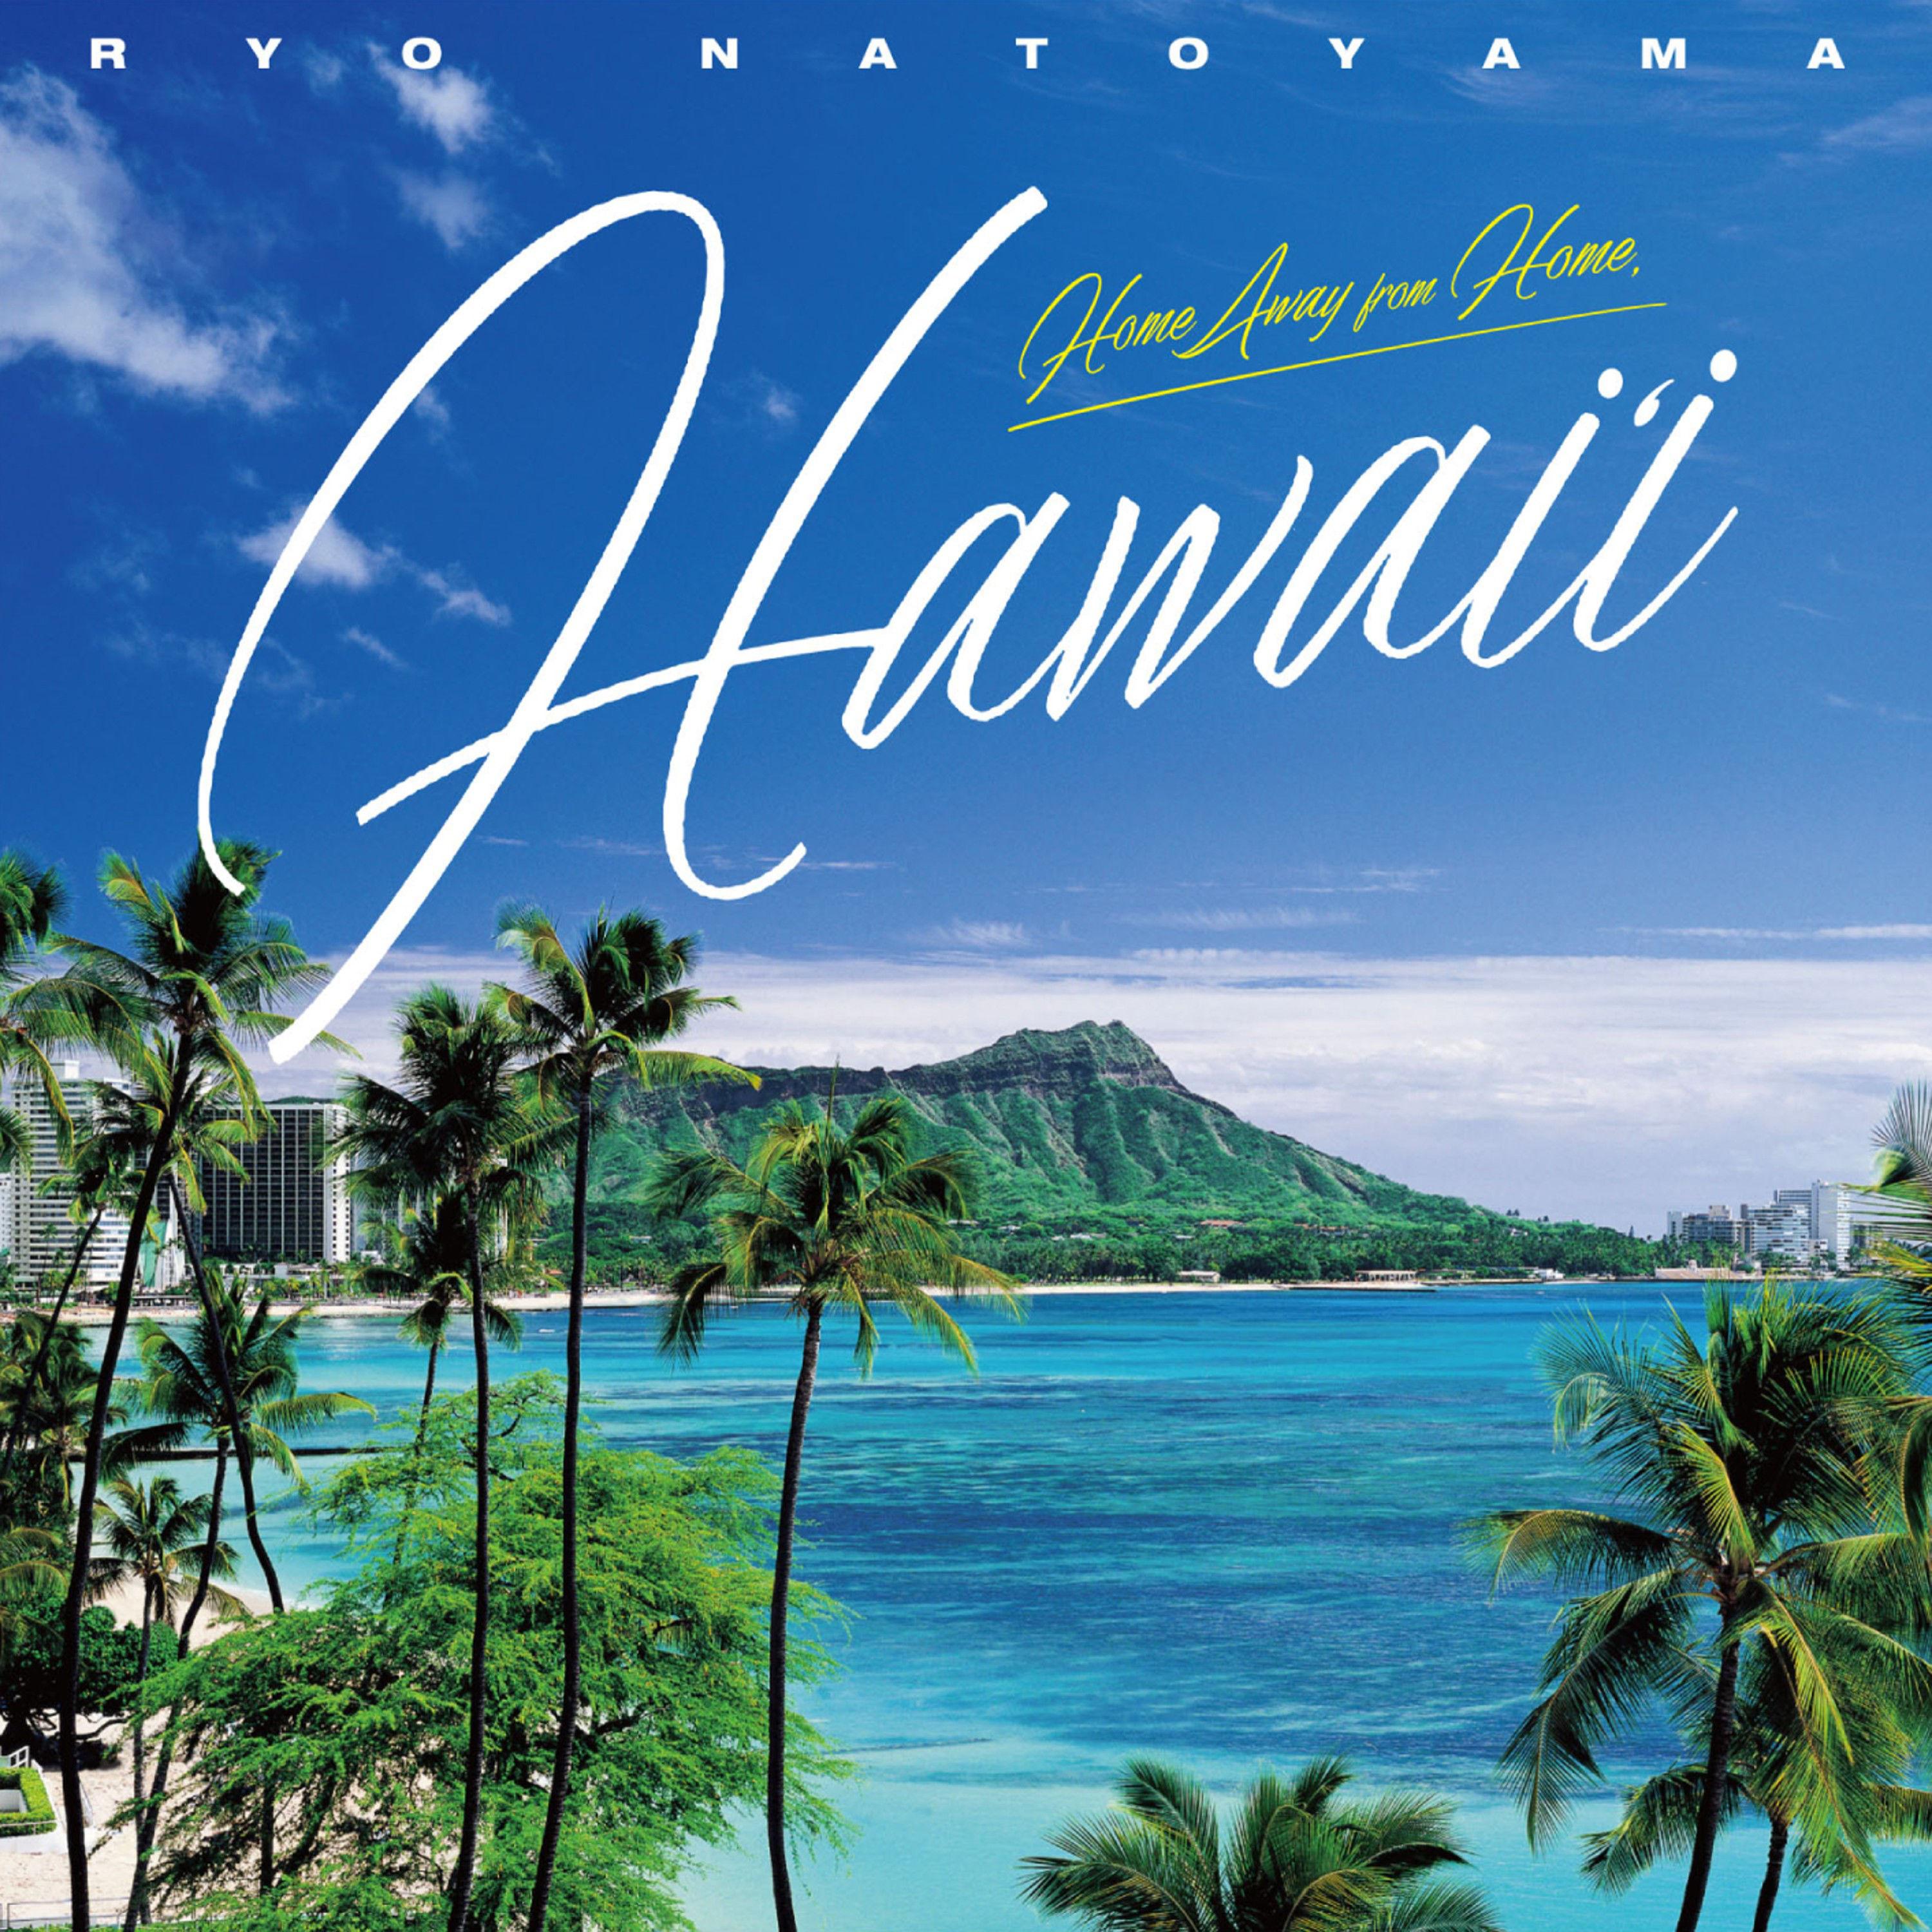 Home Away from Home," HAWAI' I"